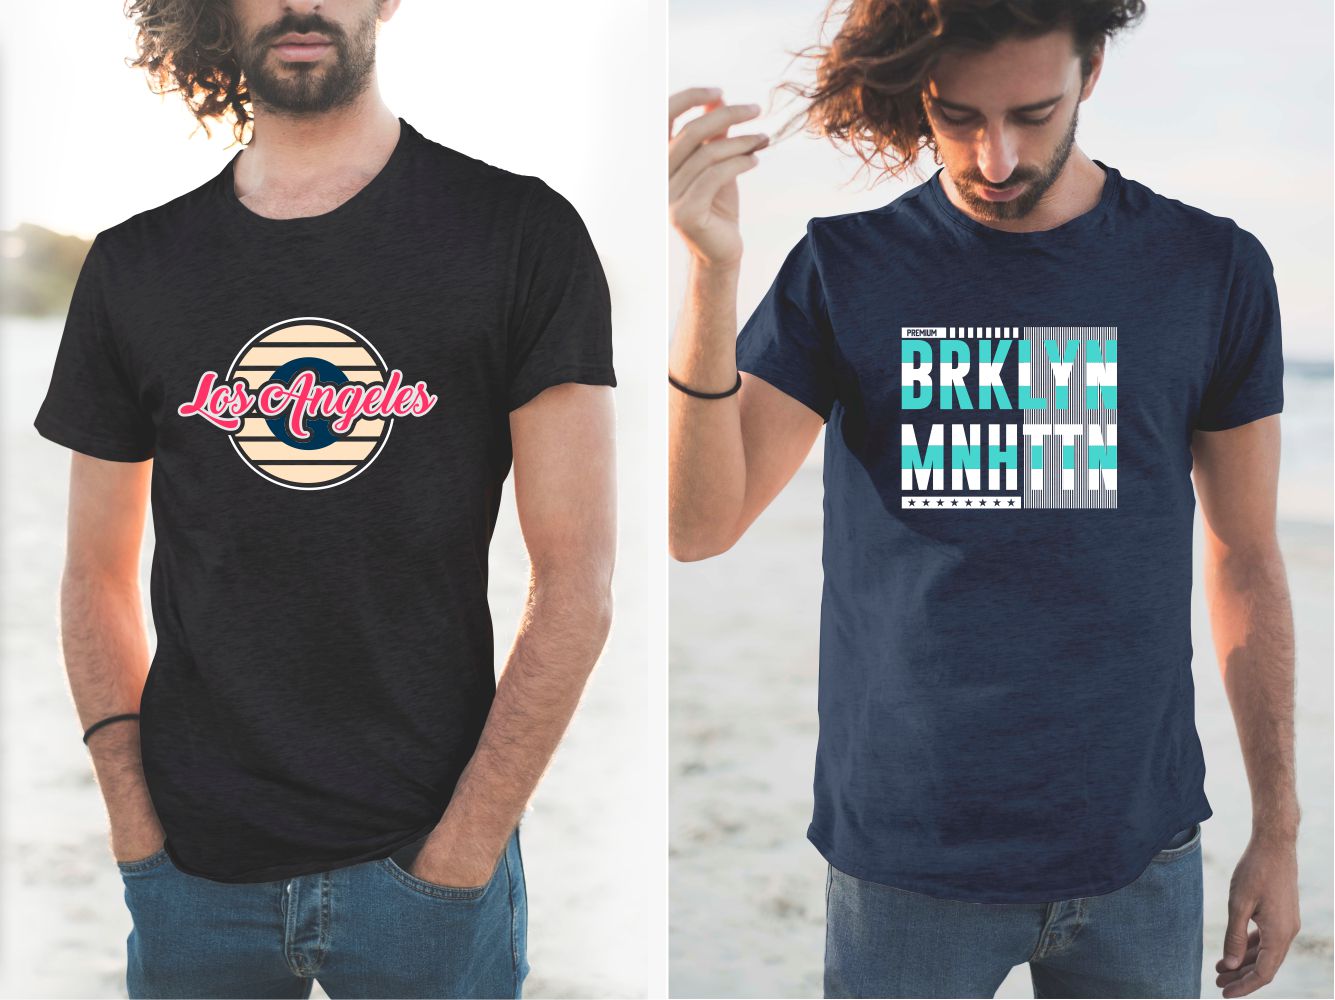 T-shirts for men with a classic cut with a round neck and catchy slogans.